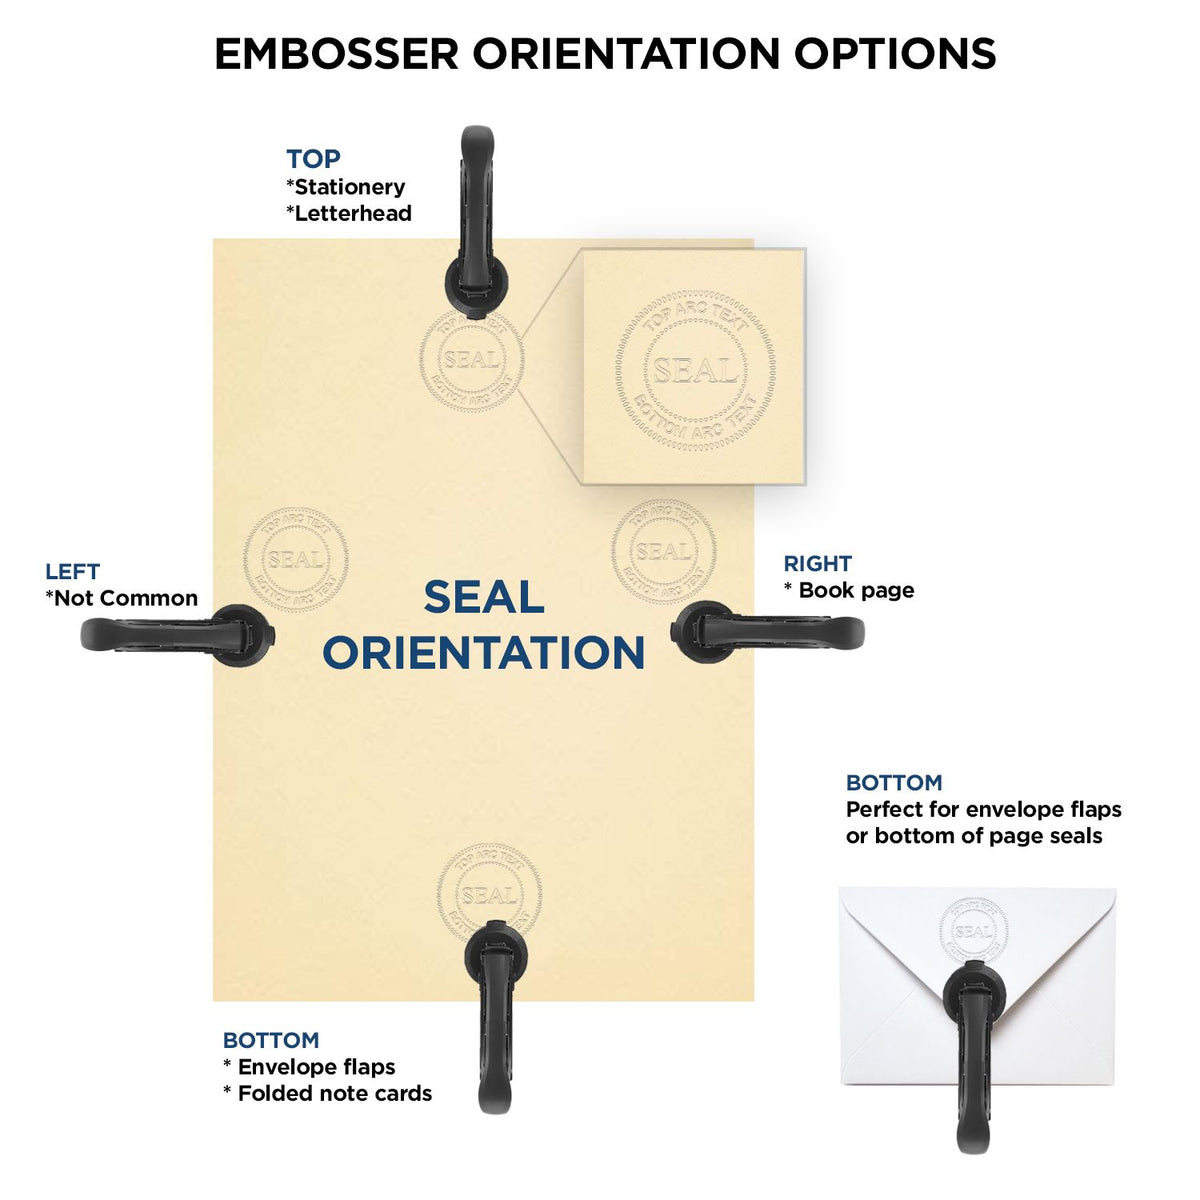 An infographic for the Heavy Duty Cast Iron Mississippi Engineer Seal Embosser showing embosser orientation, this is showing examples of a top, bottom, right and left insert.